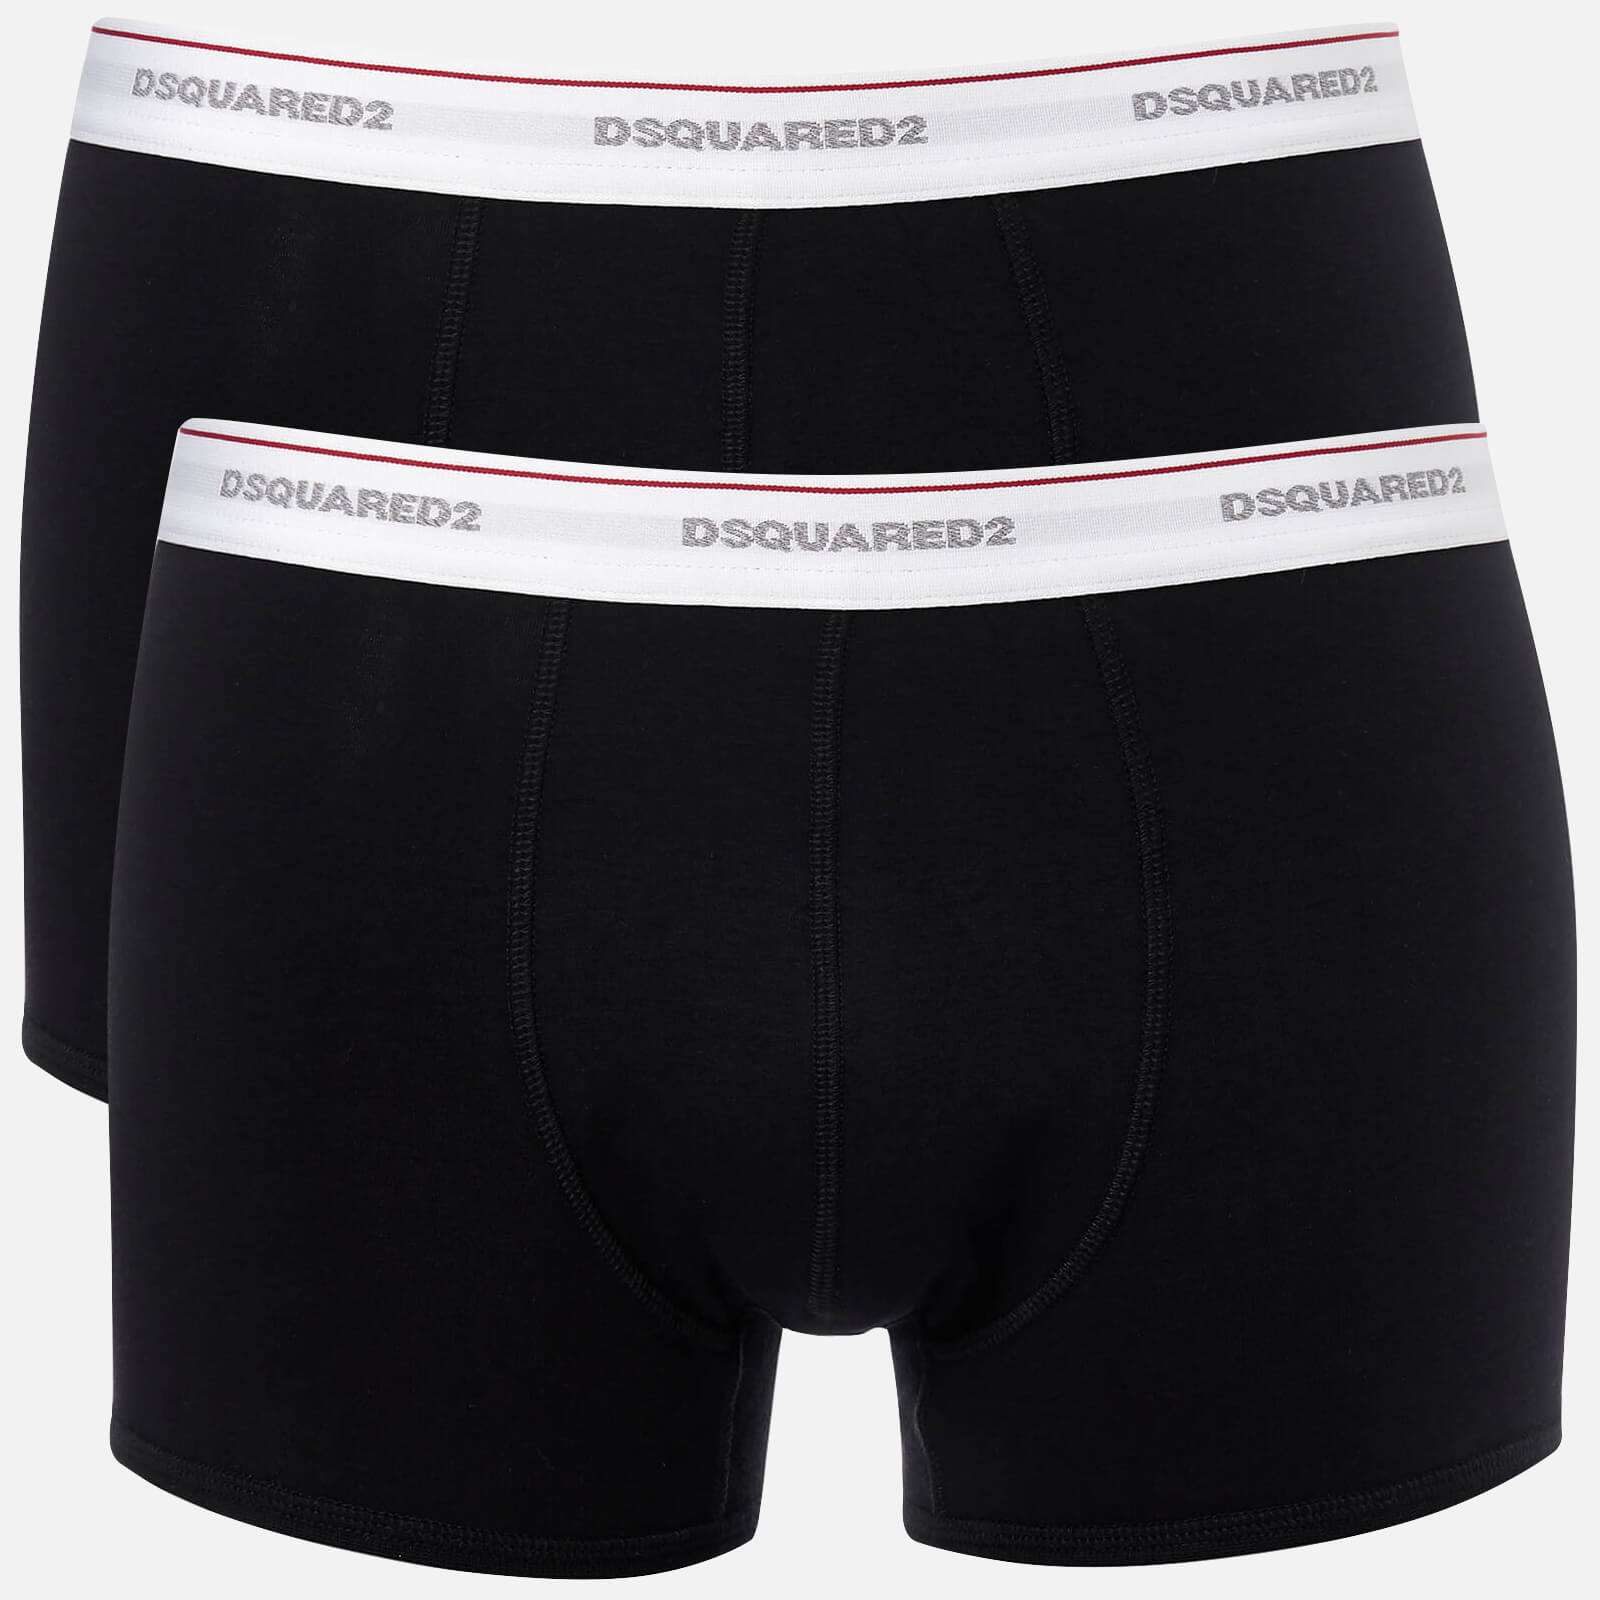 Dsquared2 Boxer Shorts Sale, 51% OFF | www.alforja.cat